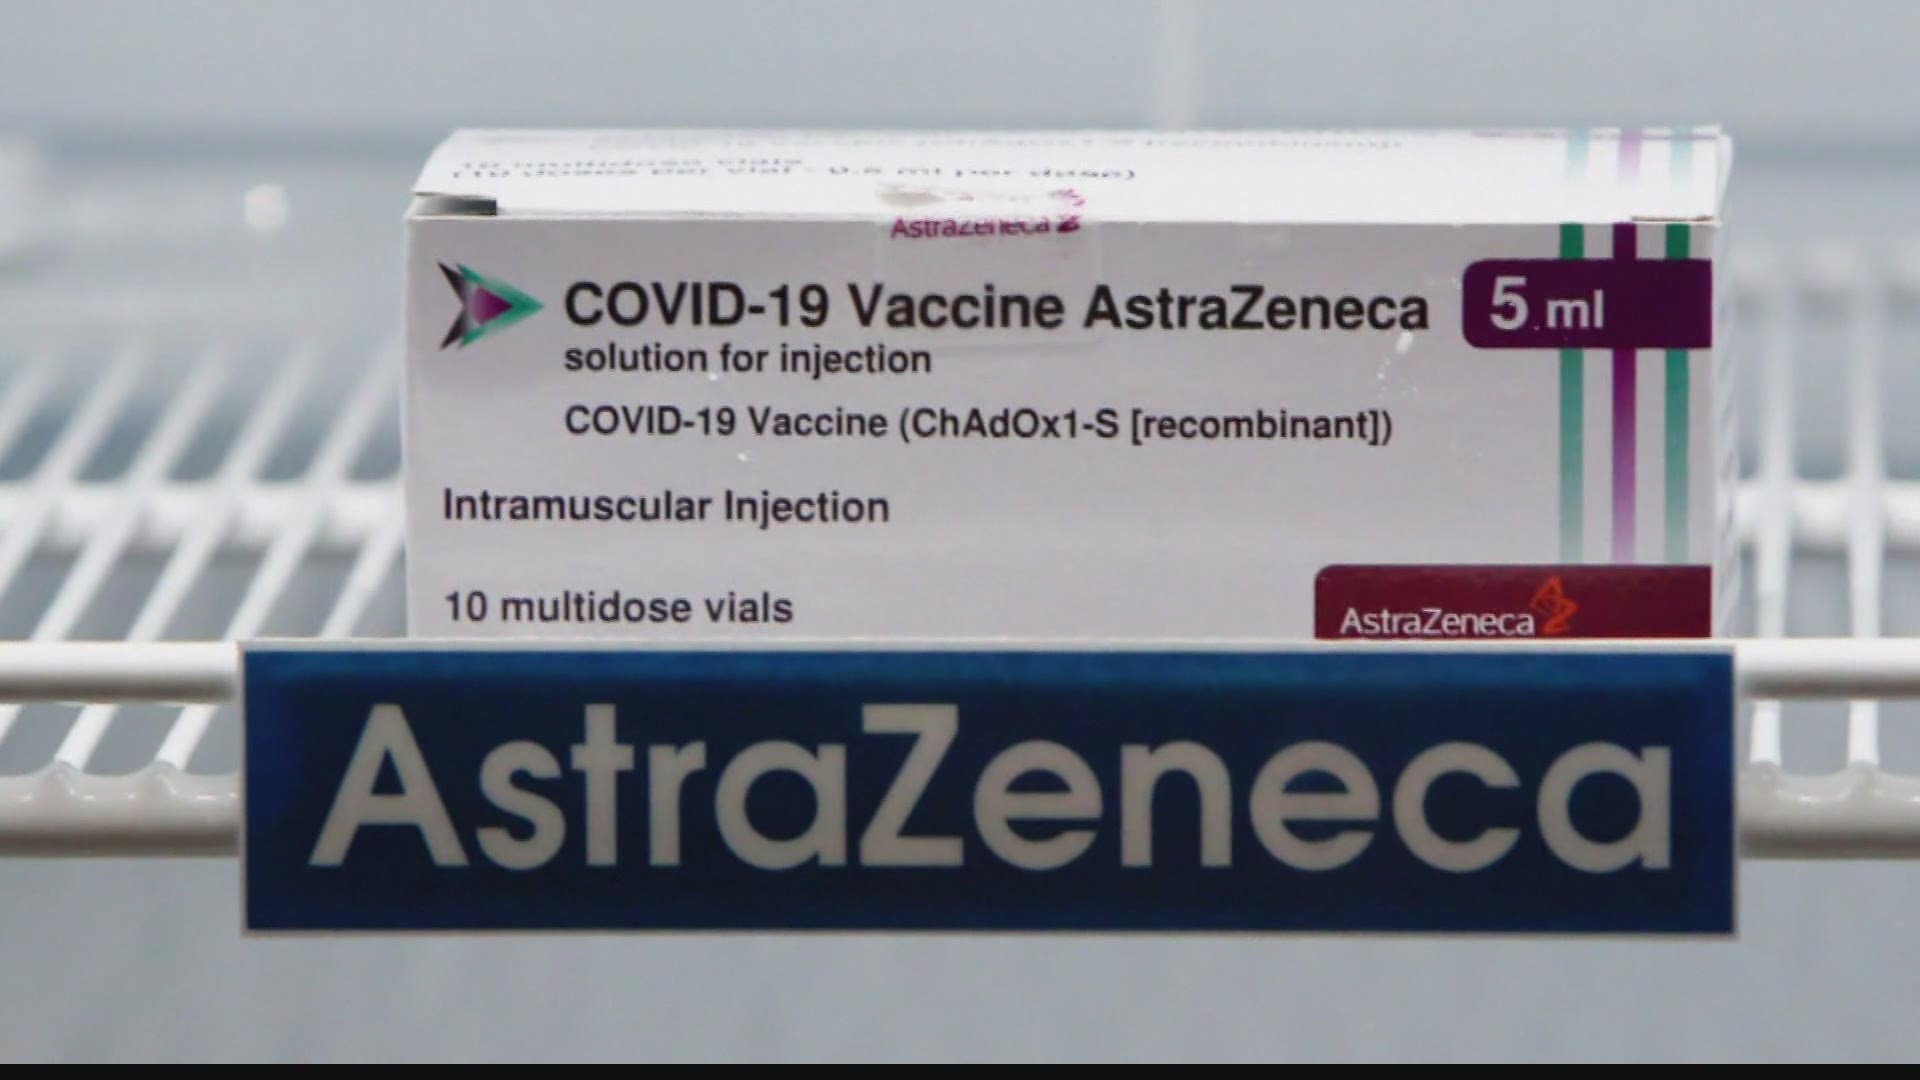 AstraZeneca announced Monday that the two-dose vaccine it developed with Oxford showed promising results in its U.S. trial.